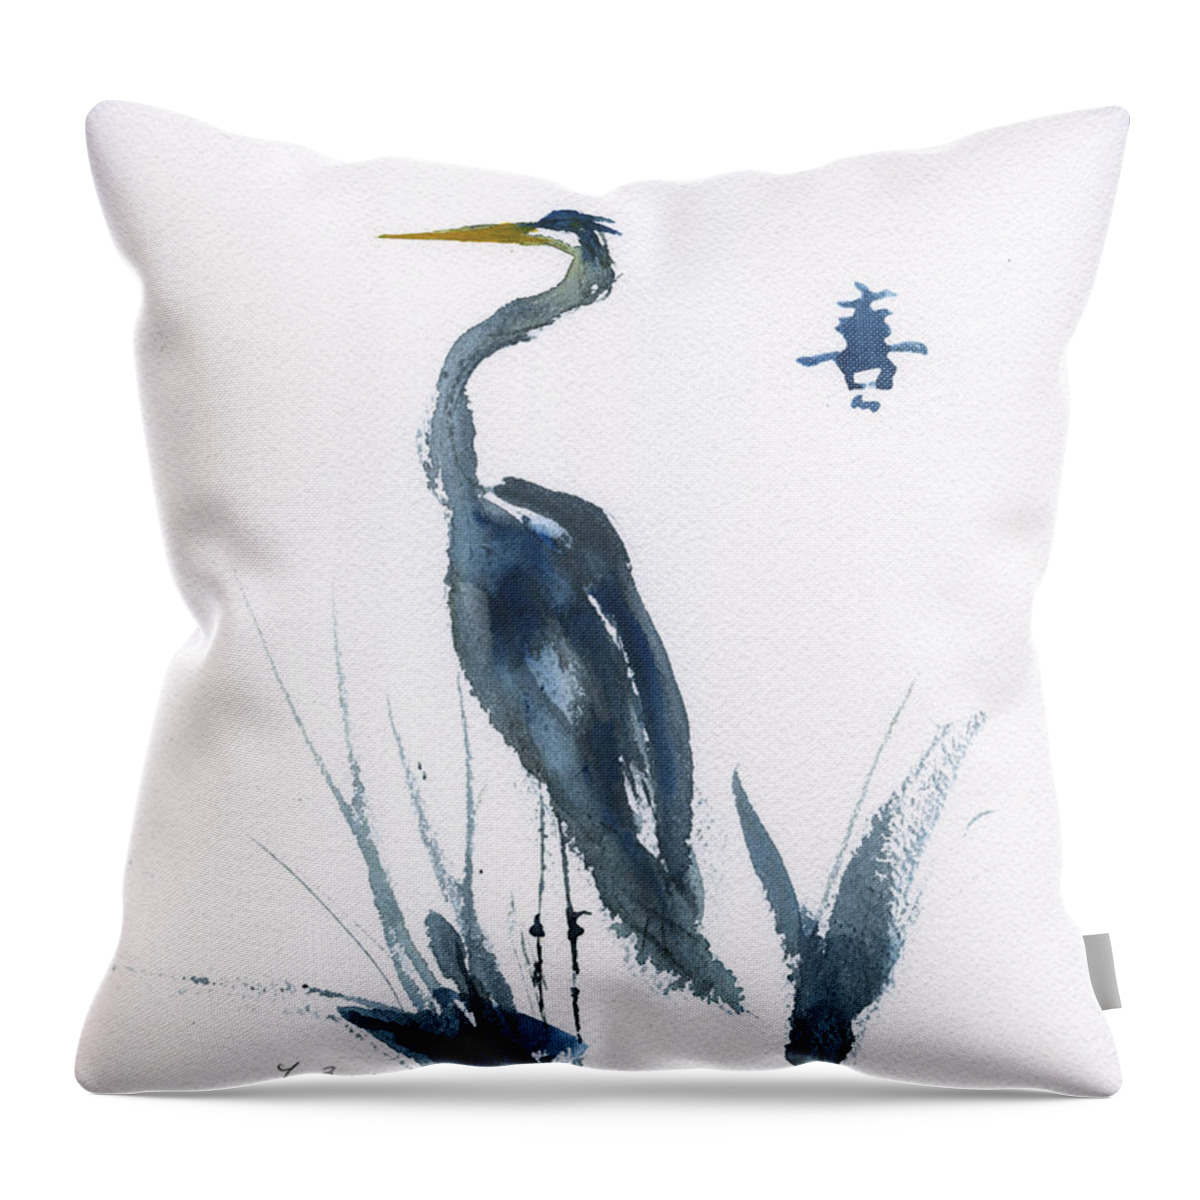 Joy Of The Great Blue Heron Abstract 2 Throw Pillow featuring the painting Joy Of The Great Blue Heron Abstract 2 by Frank Bright